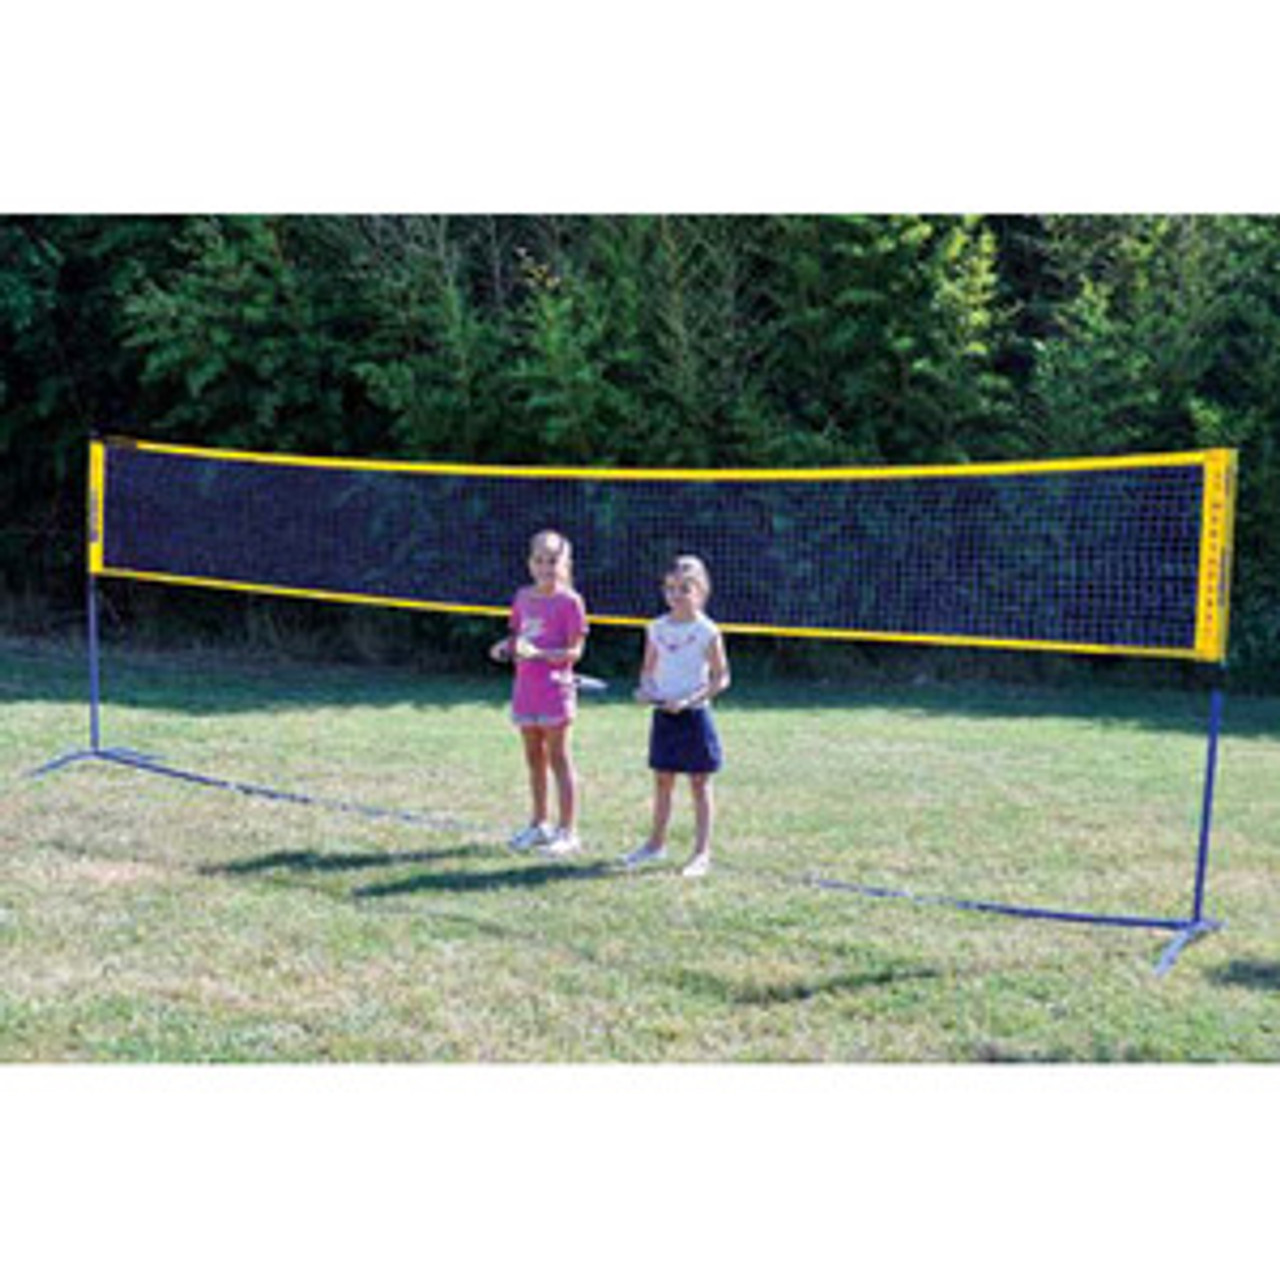 Maxi-Net Portable Tennis Net - Patented Oval Tube System